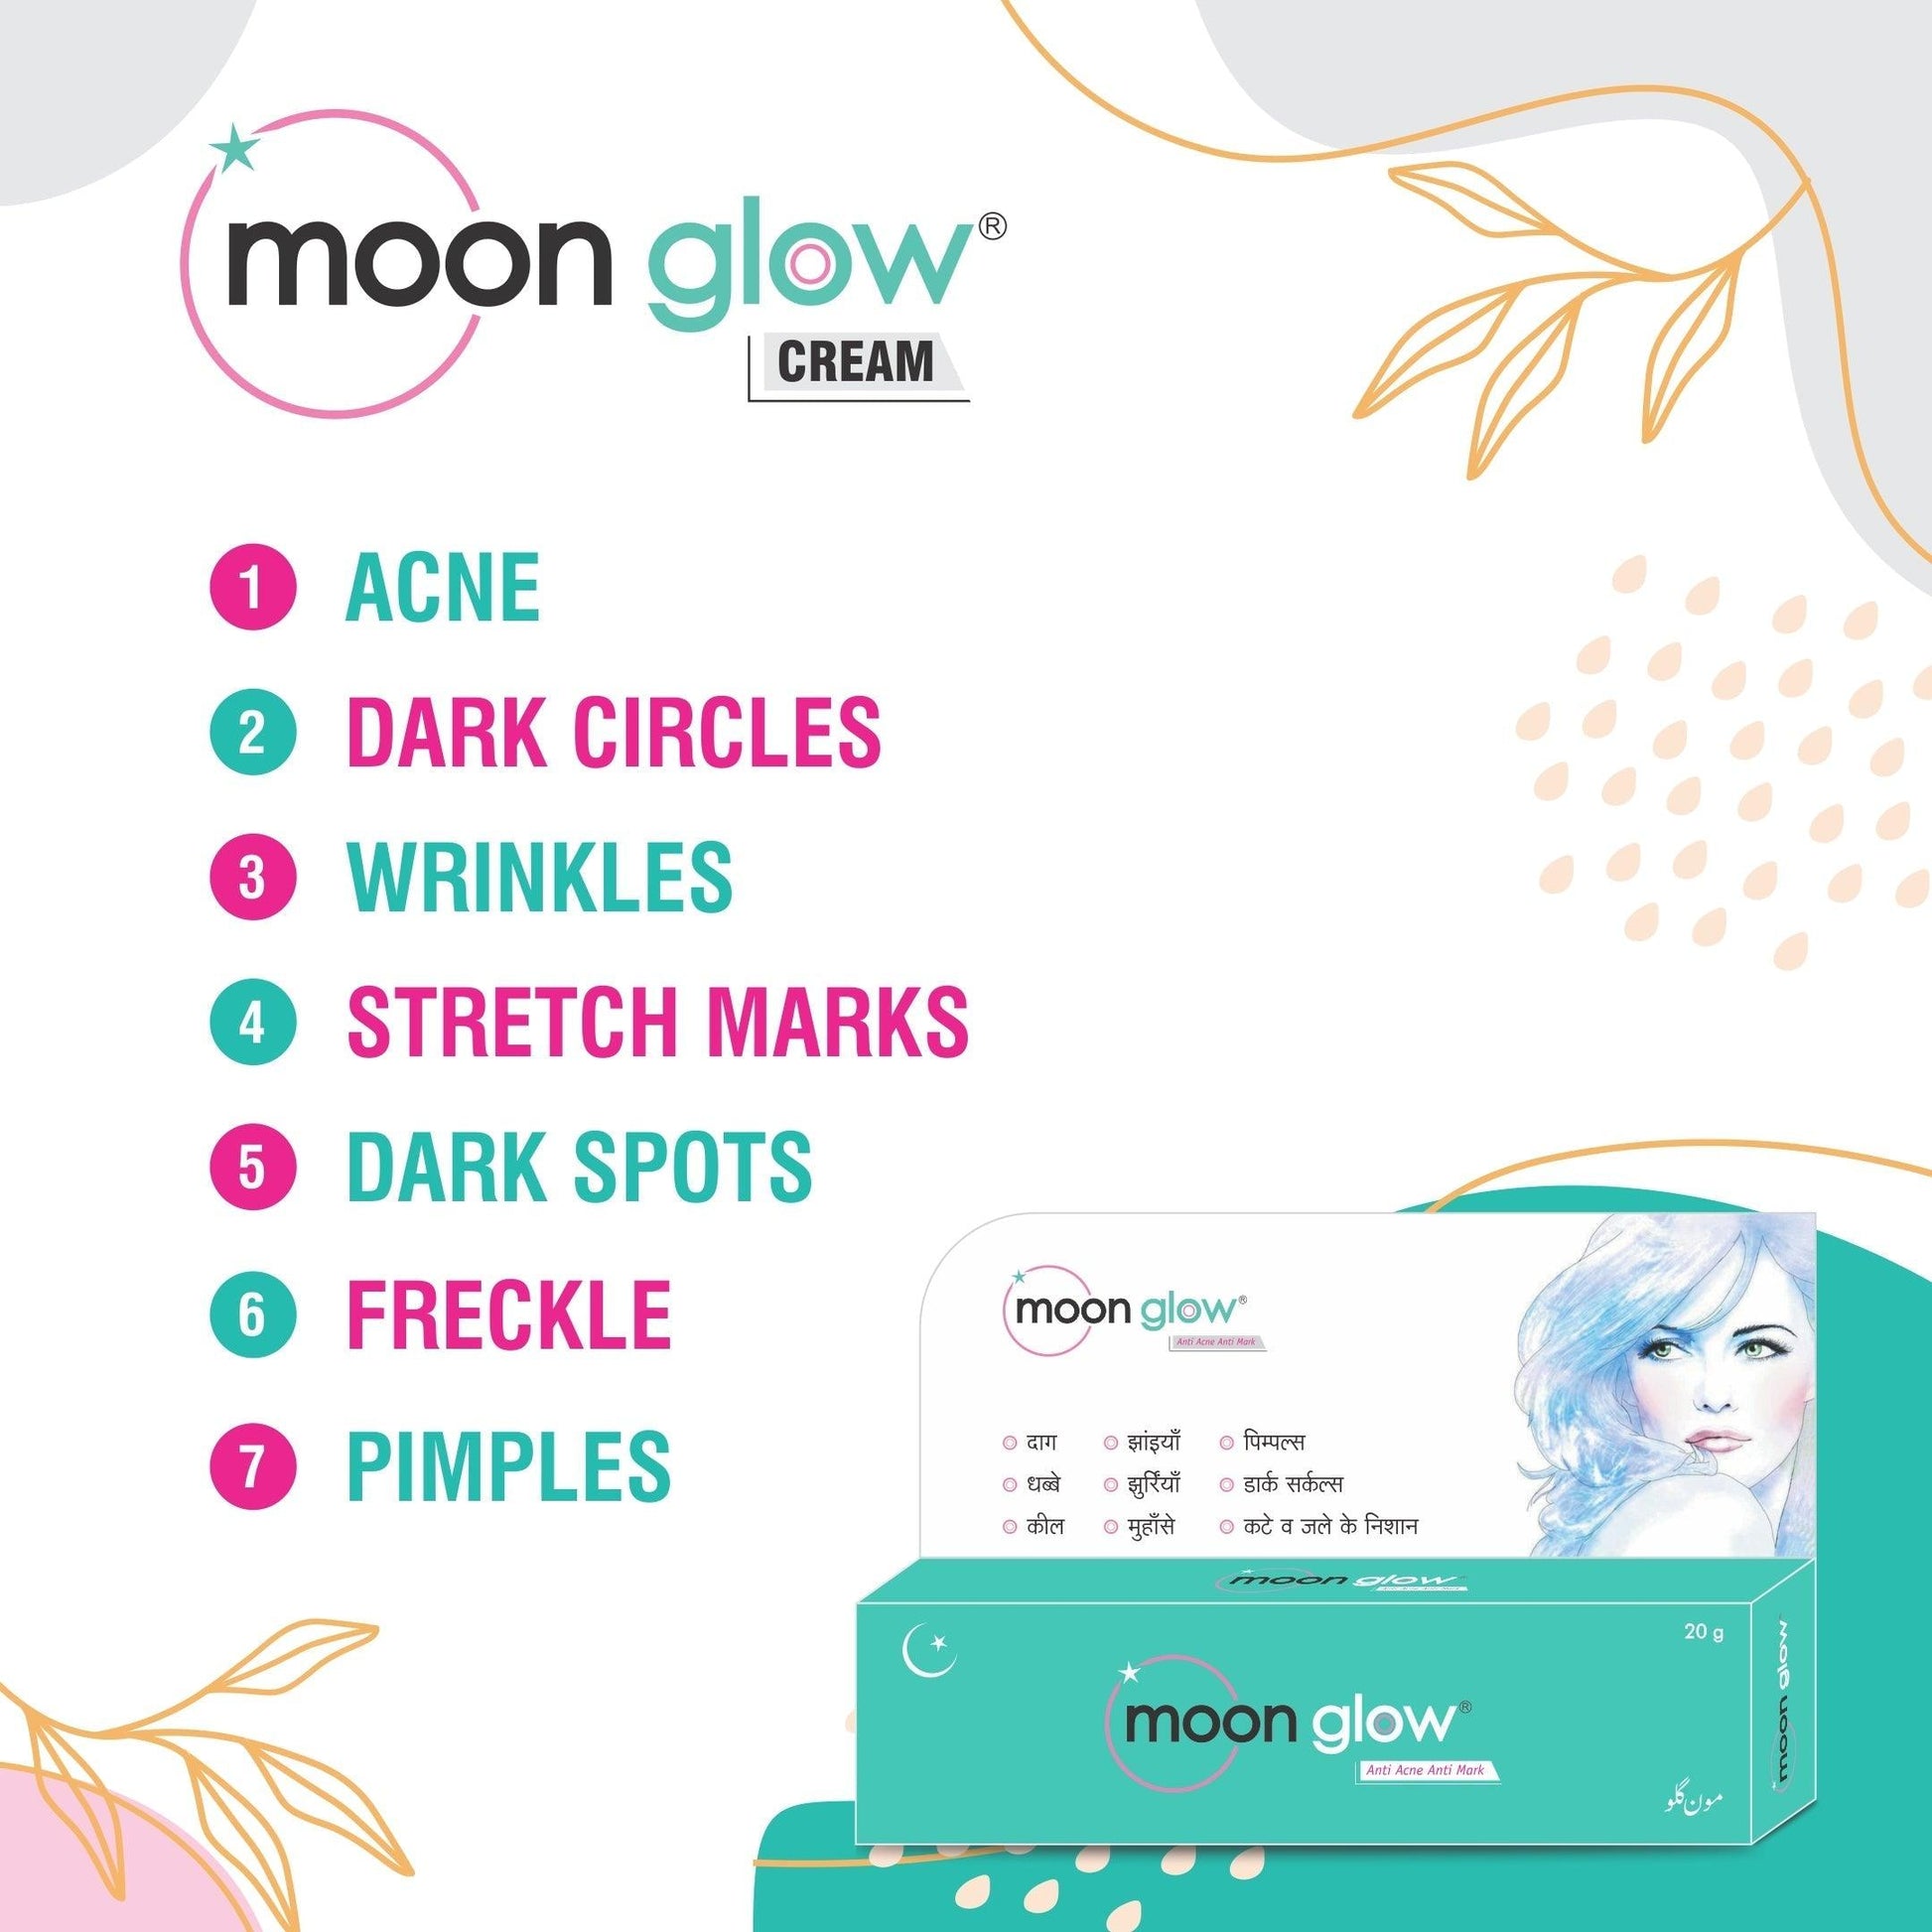 Moon Glow Cream, Pearl Face Wash and Soap for Acne, Pimples, Black Spots, Dark Circles, Stretch Marks, Anti-Aging and Fairness (1 Cream + 1 Pearl Face Wash +1 Soap) - Olefia Biopharma Limited